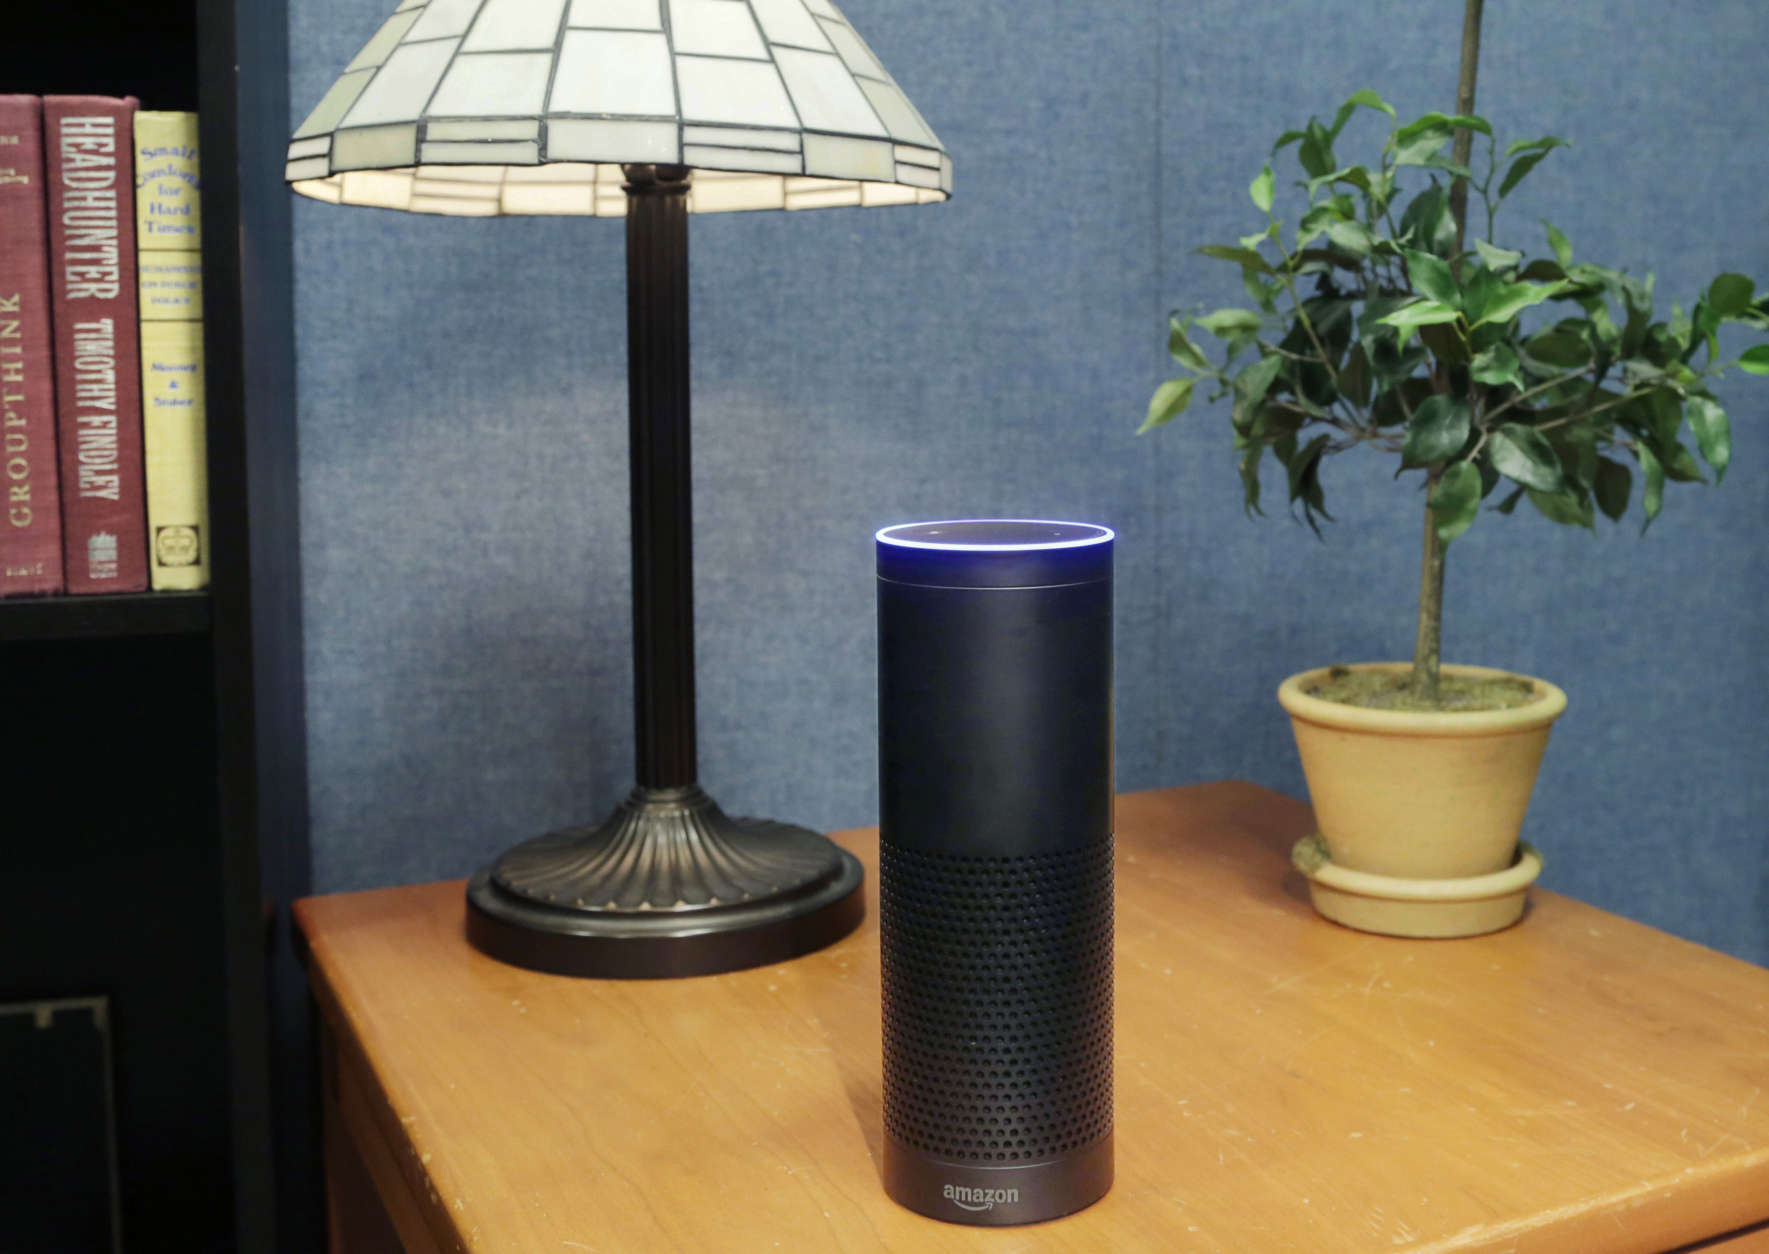 This July 29, 2015, file photo made in New York shows Amazon's Echo, a digital assistant that continually listens for commands such as for a song, a sports score or the weather. Starting Thursday, March 17, 2016, Amazons voice assistant will tell you how well you slept and how much more exercise you need, at least if you have a Fitbit fitness tracker and an Alexa-compatible device, such as Amazons Echo speaker and Fire TV streaming devices. (AP Photo/Mark Lennihan, File)